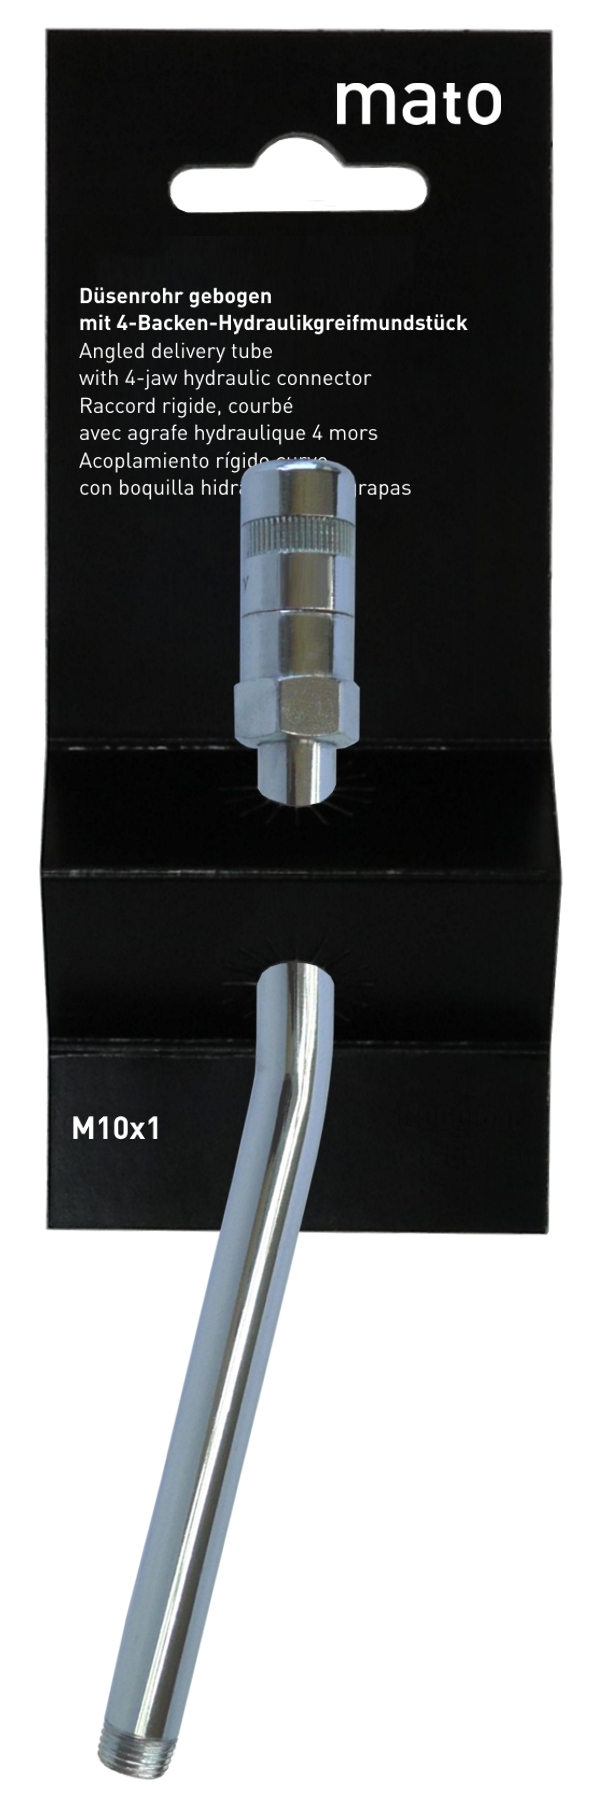 Delivery tube with 4-jaw hydraulic connector M10x1<br>PoS-design retail package with paper-headcard